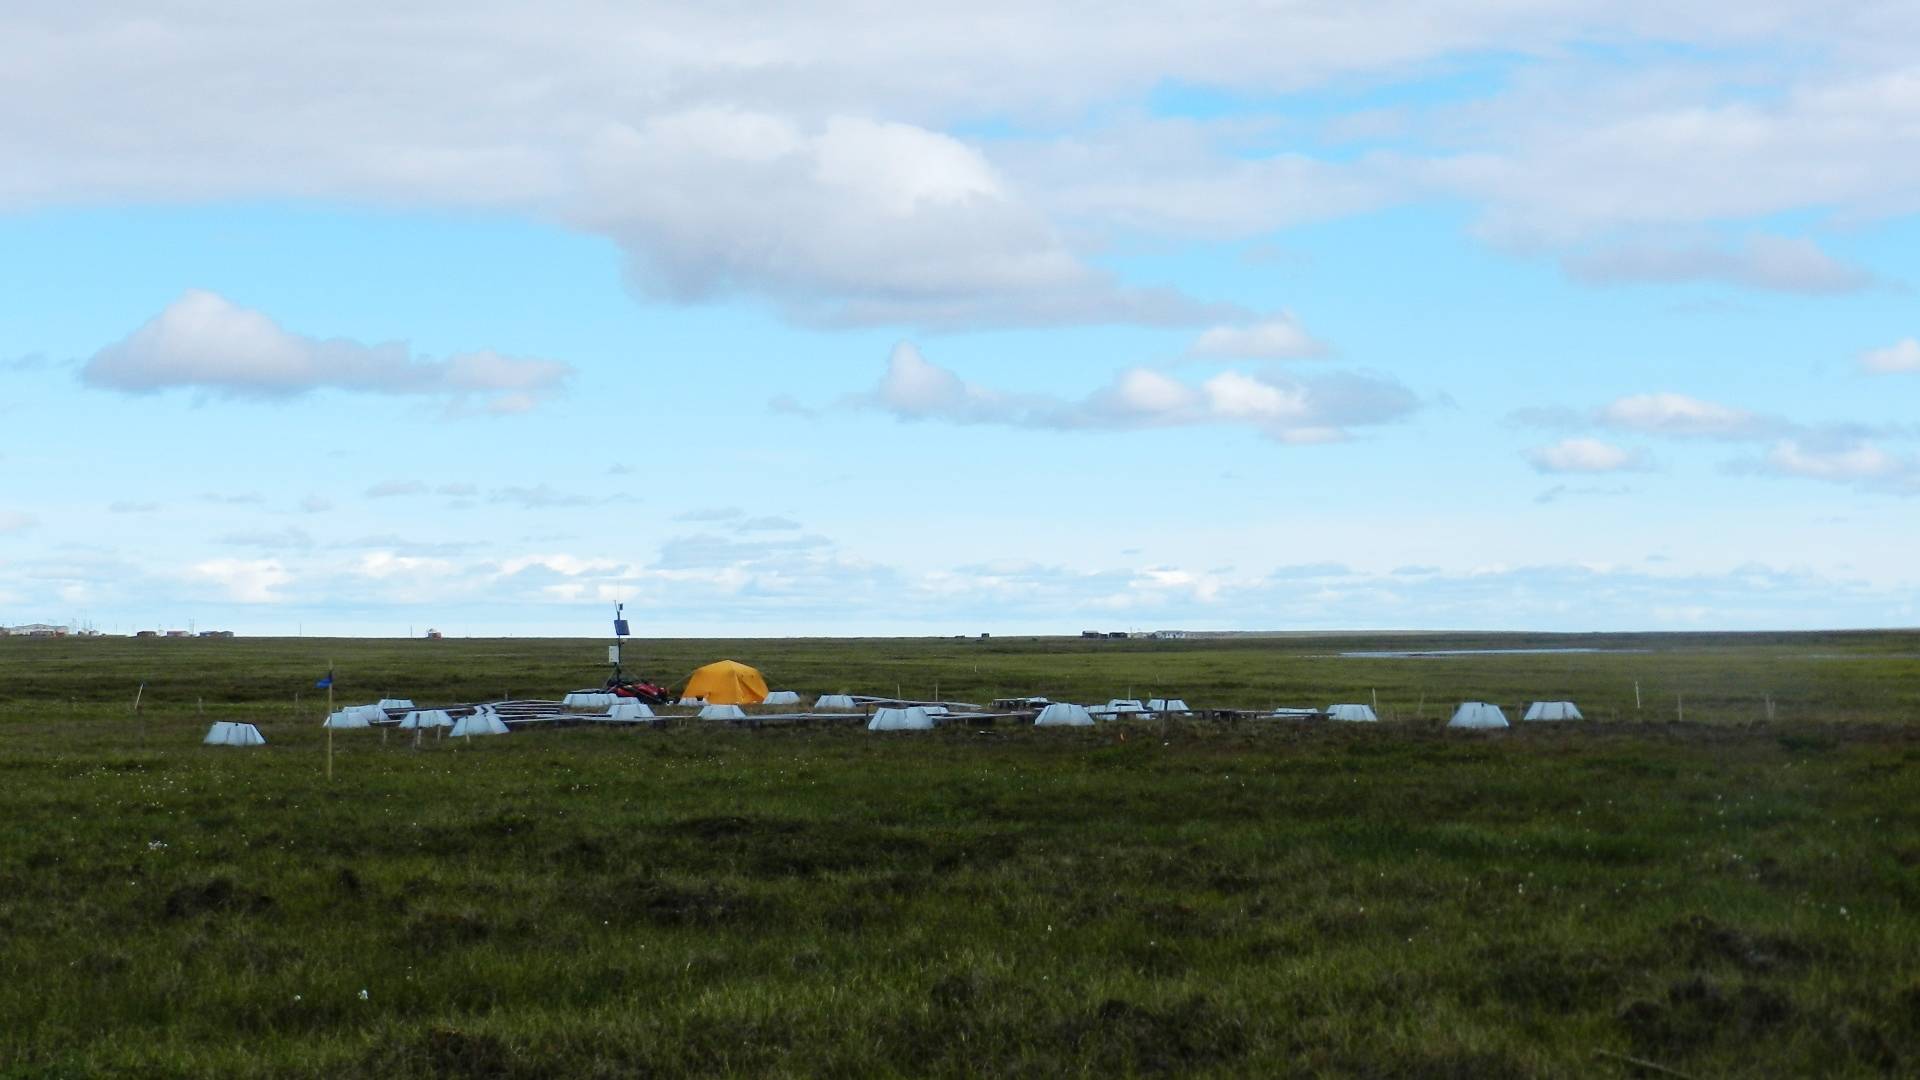 Photo in Atqasuk at the wet site.